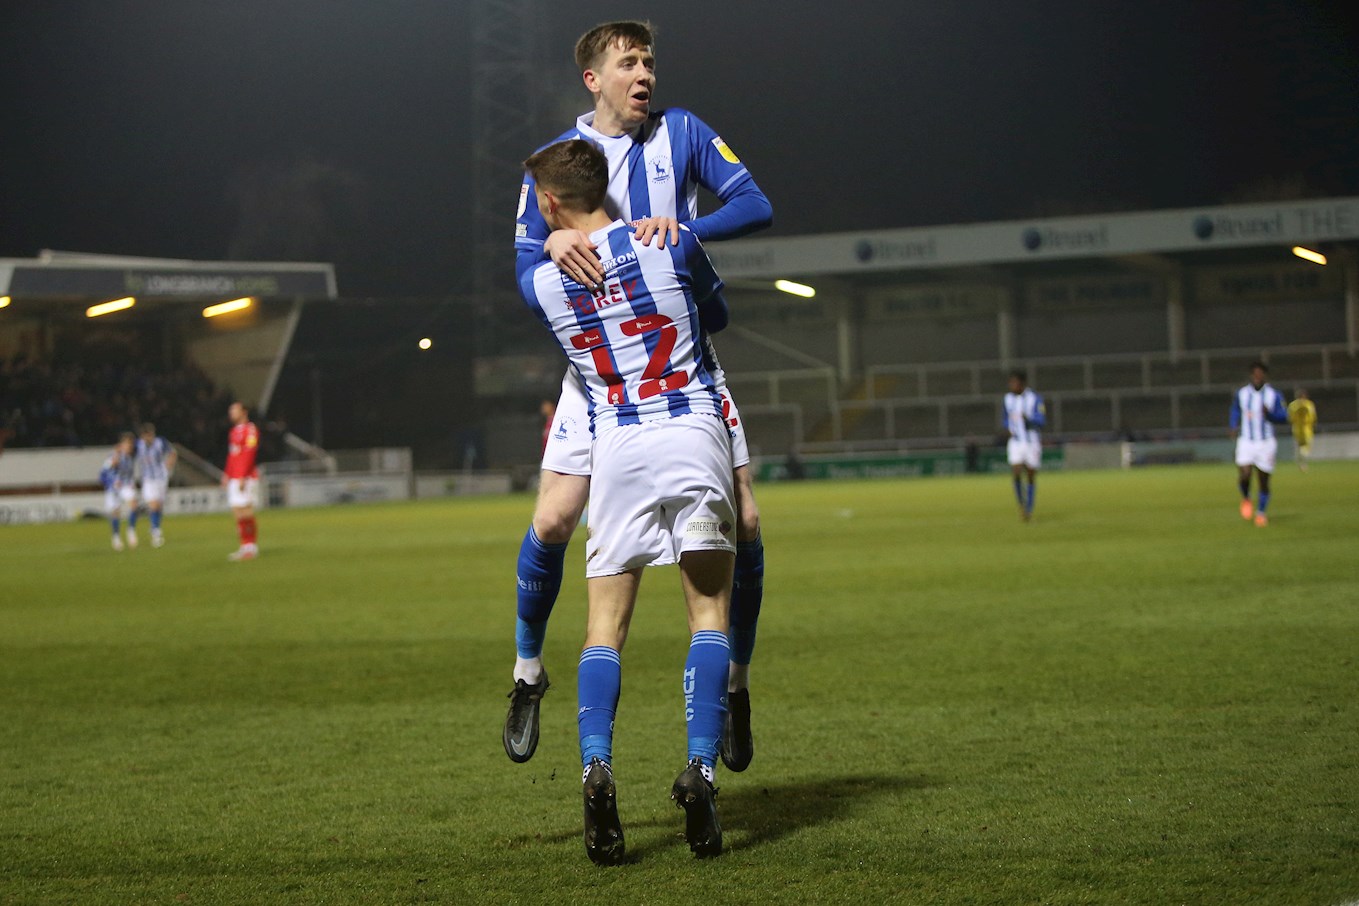 Hartlepool under the lights next up for Alty - here's your match